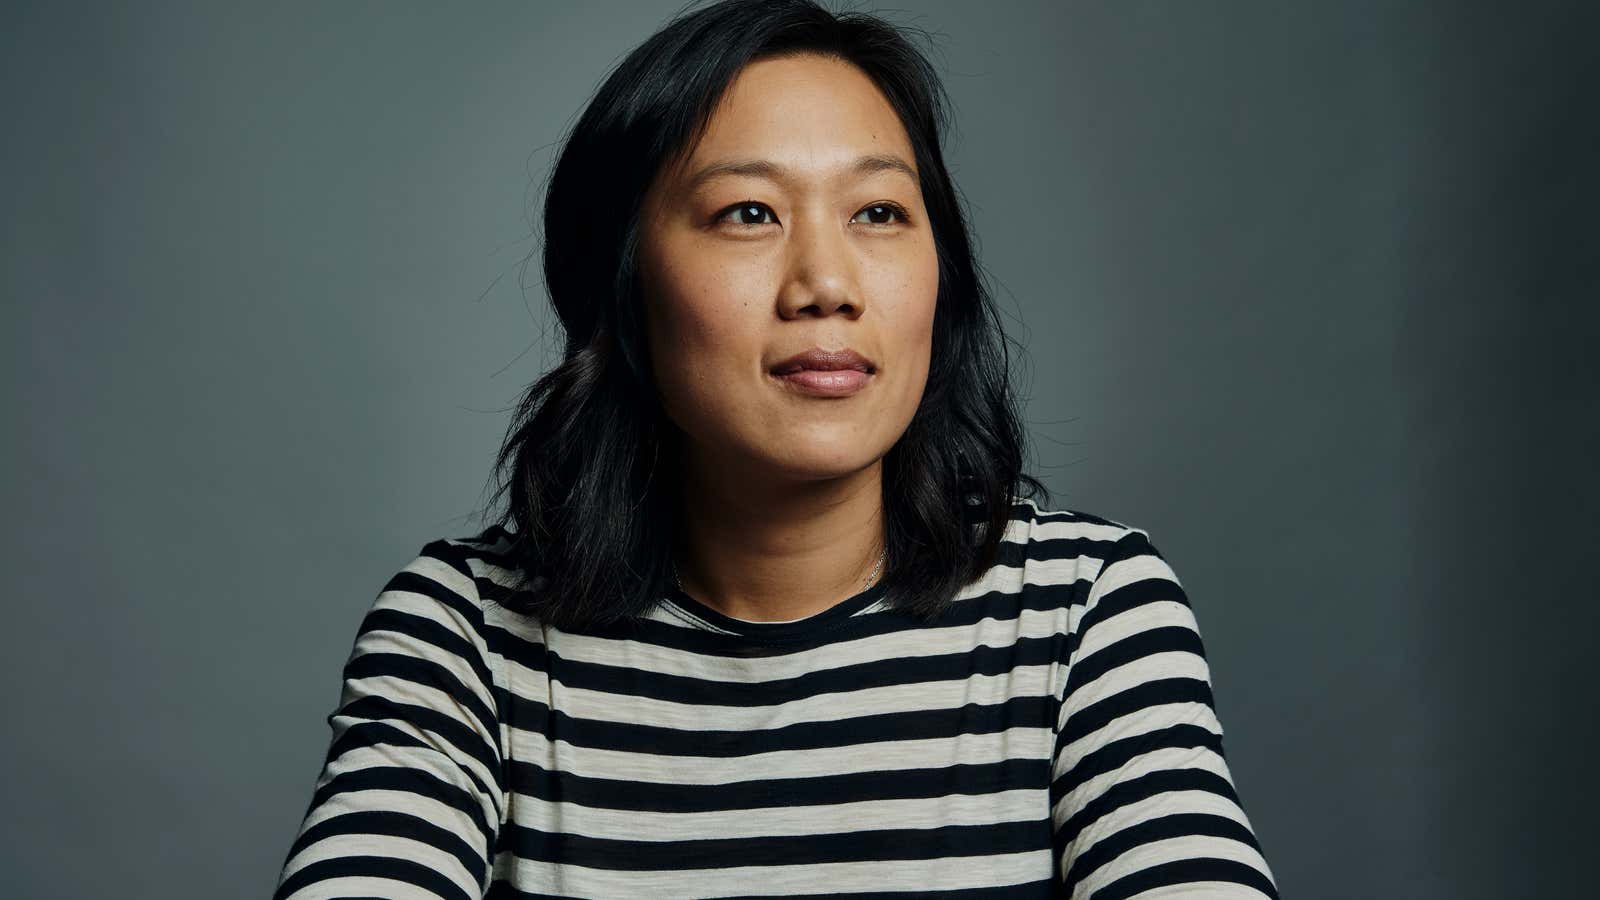 Exclusive Priscilla Chan takes us inside her life and the Chan Zuckerberg Initiative